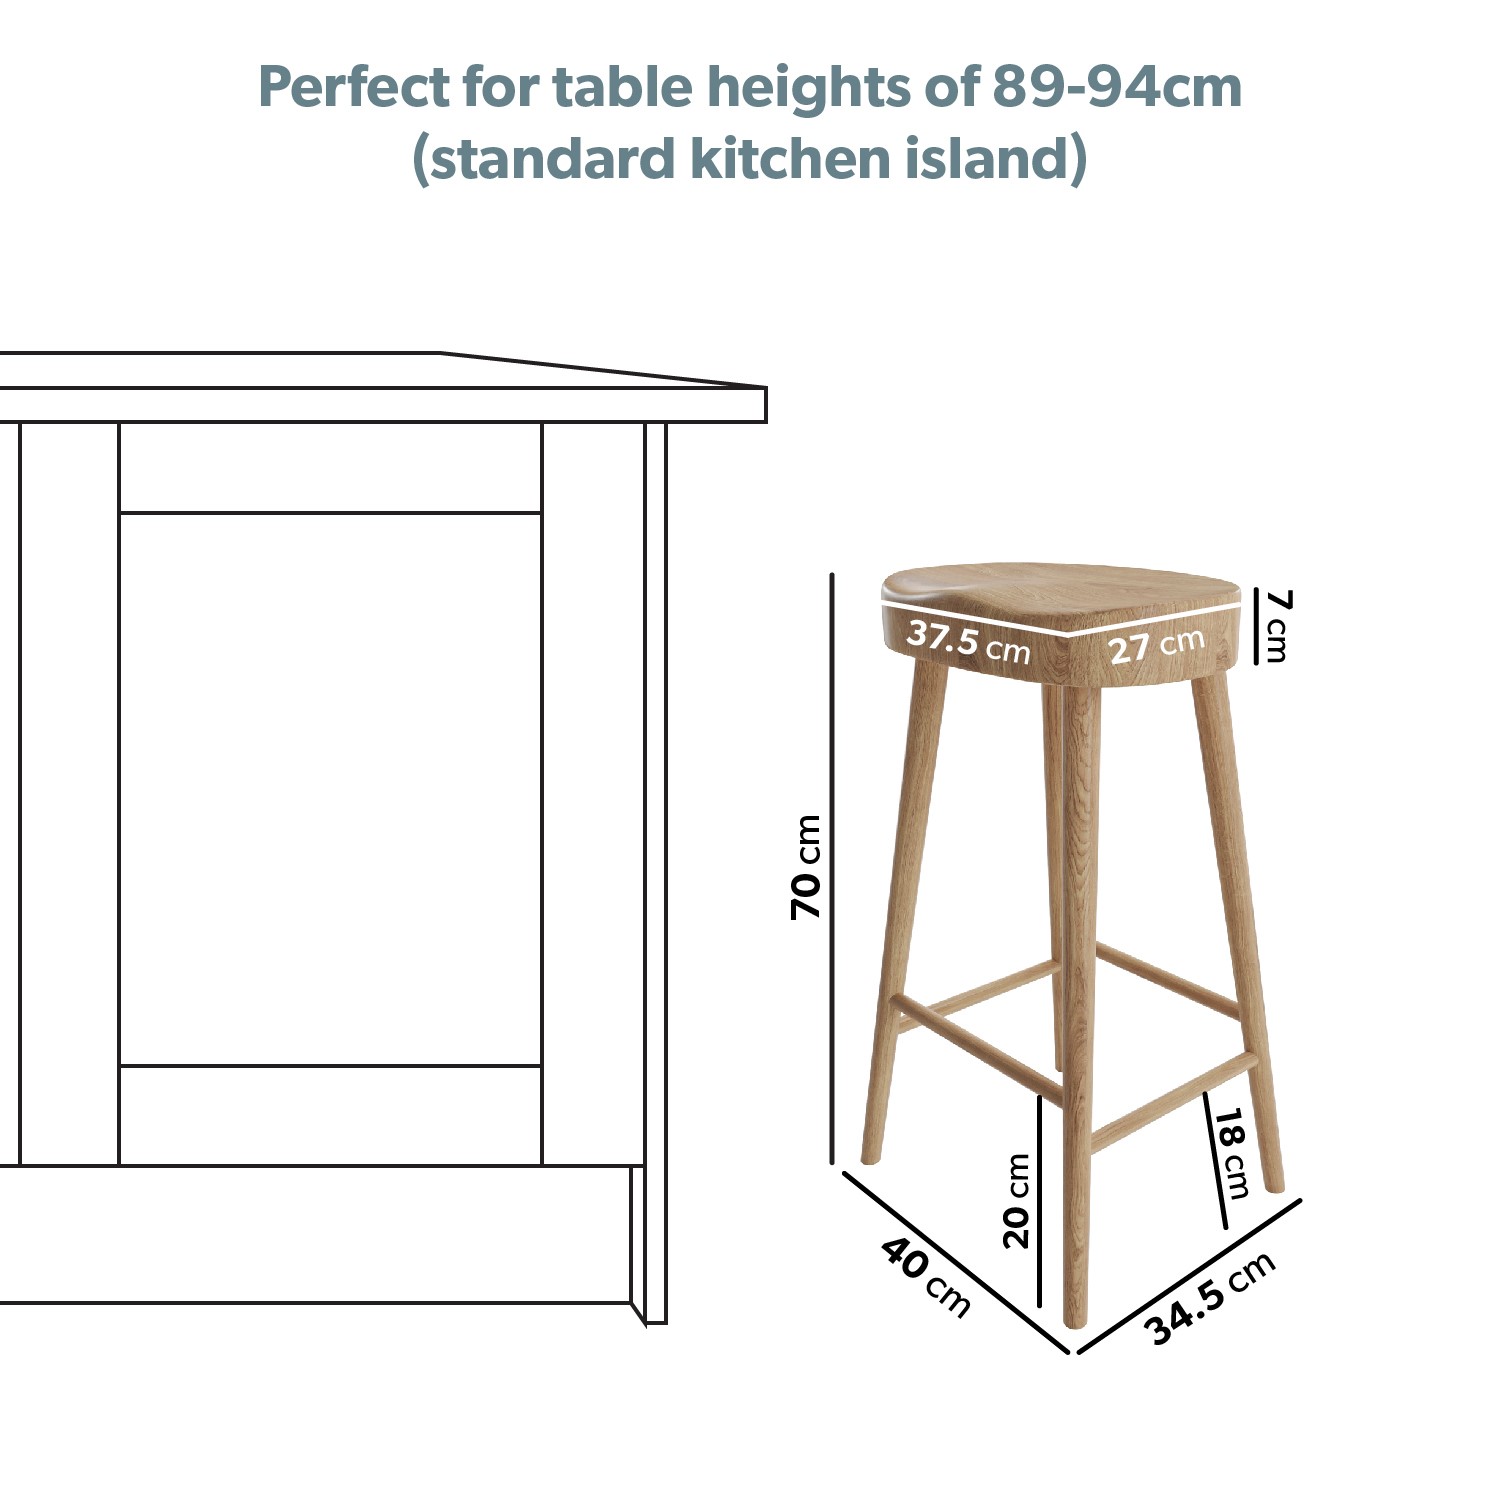 Read more about Set of 2 solid oak kitchen stools 70cm rayne